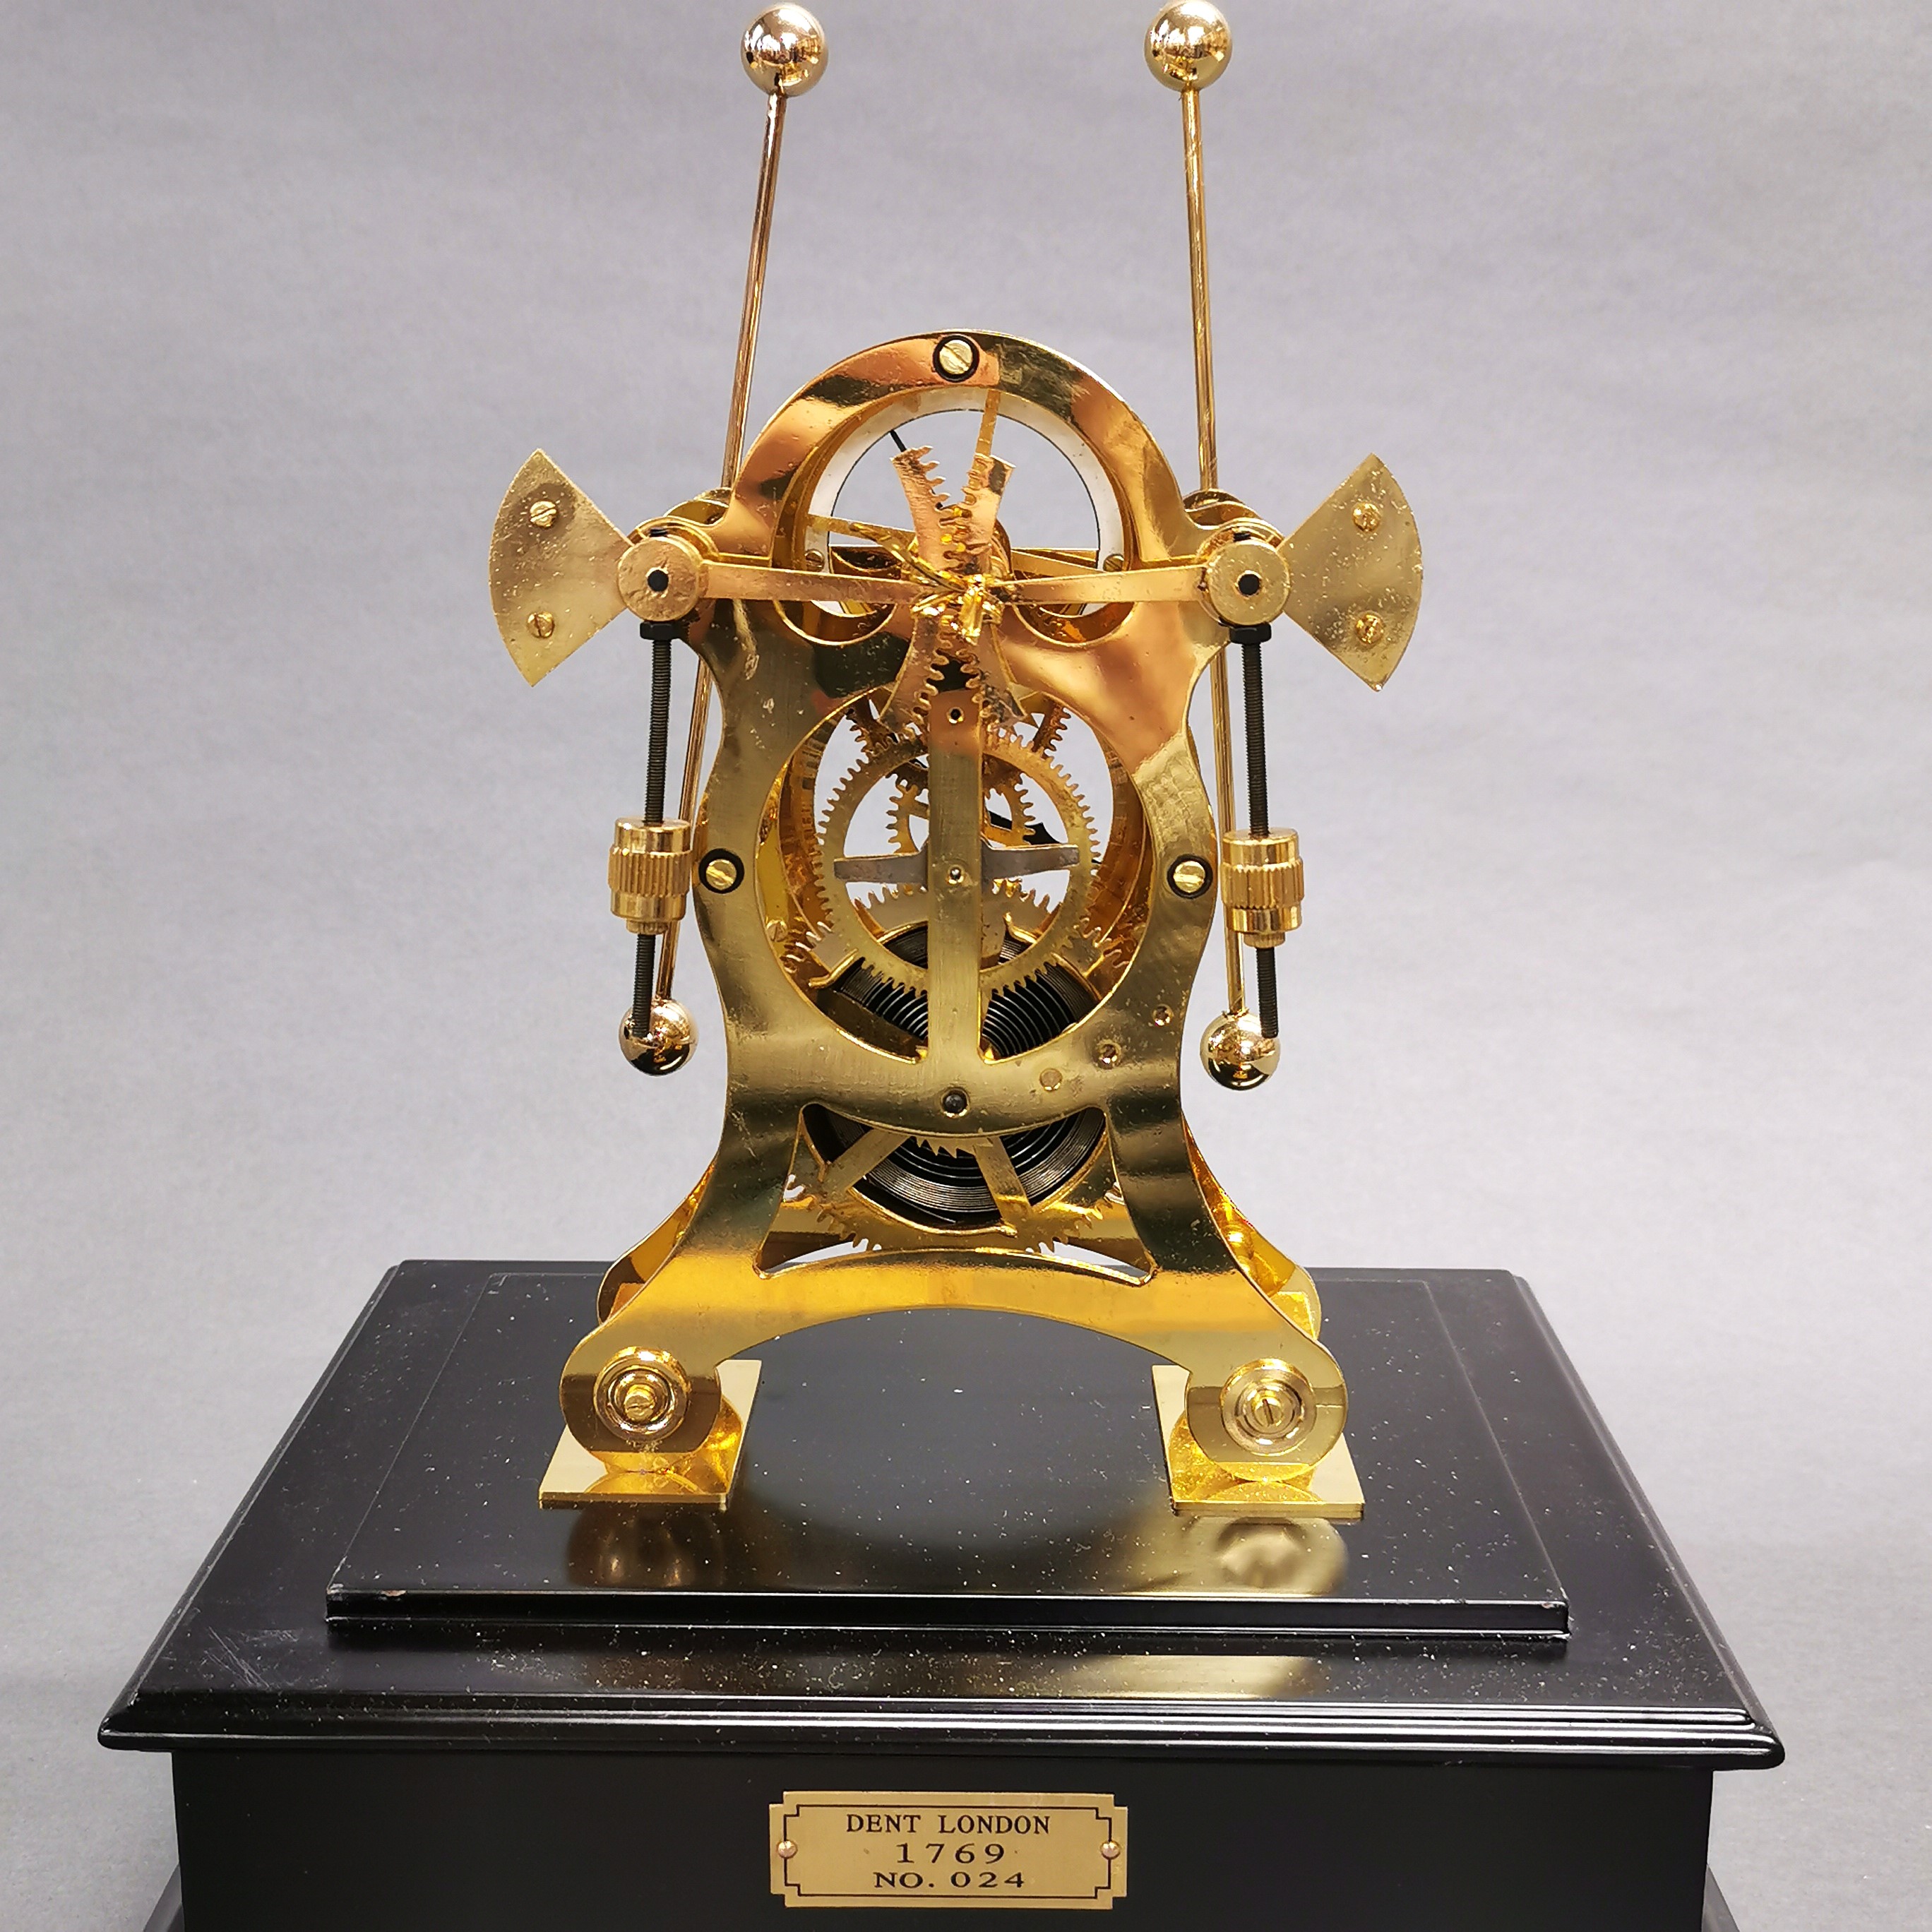 A brass and glass cased grasshopper clock. Case size 24 x 20 x 14cm. - Image 3 of 3